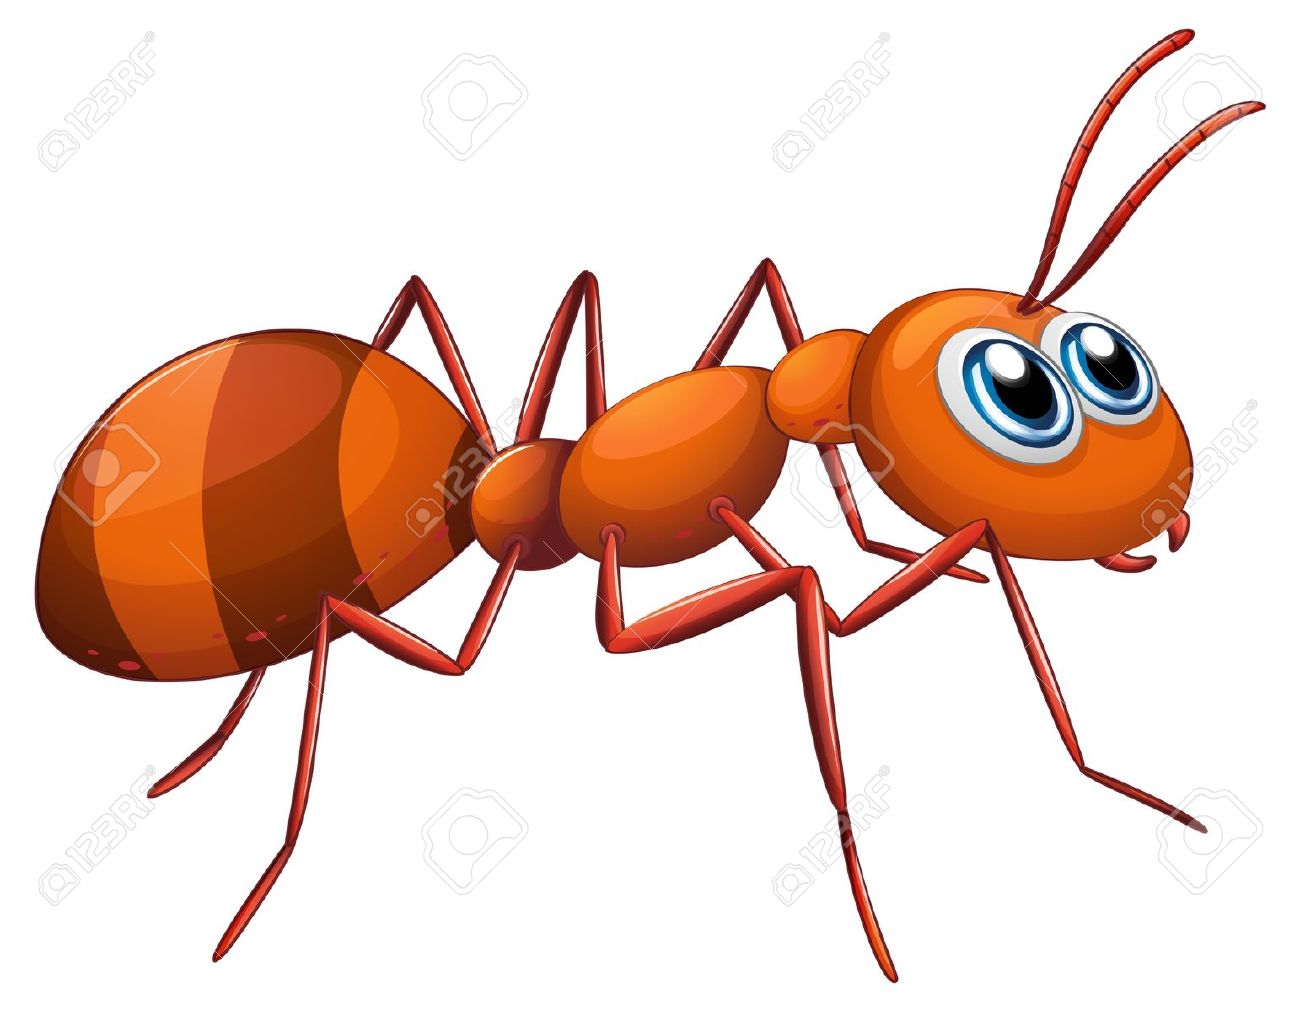 Easily images for kids. Ant clipart printable